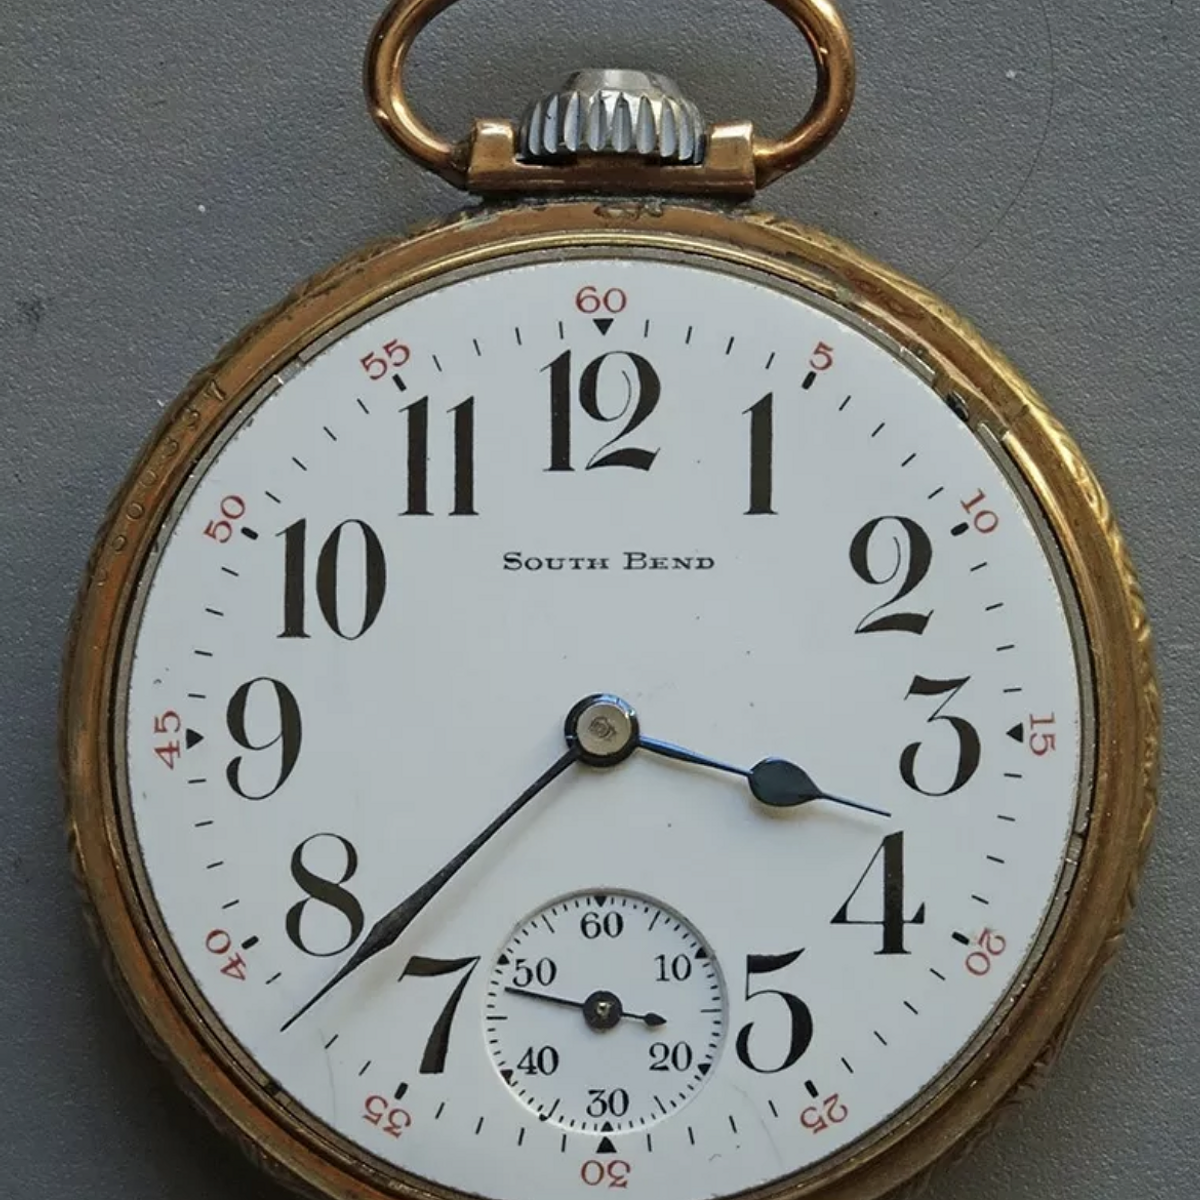 1909 South Bend Watch Grade 299 IMG_5207.PNG